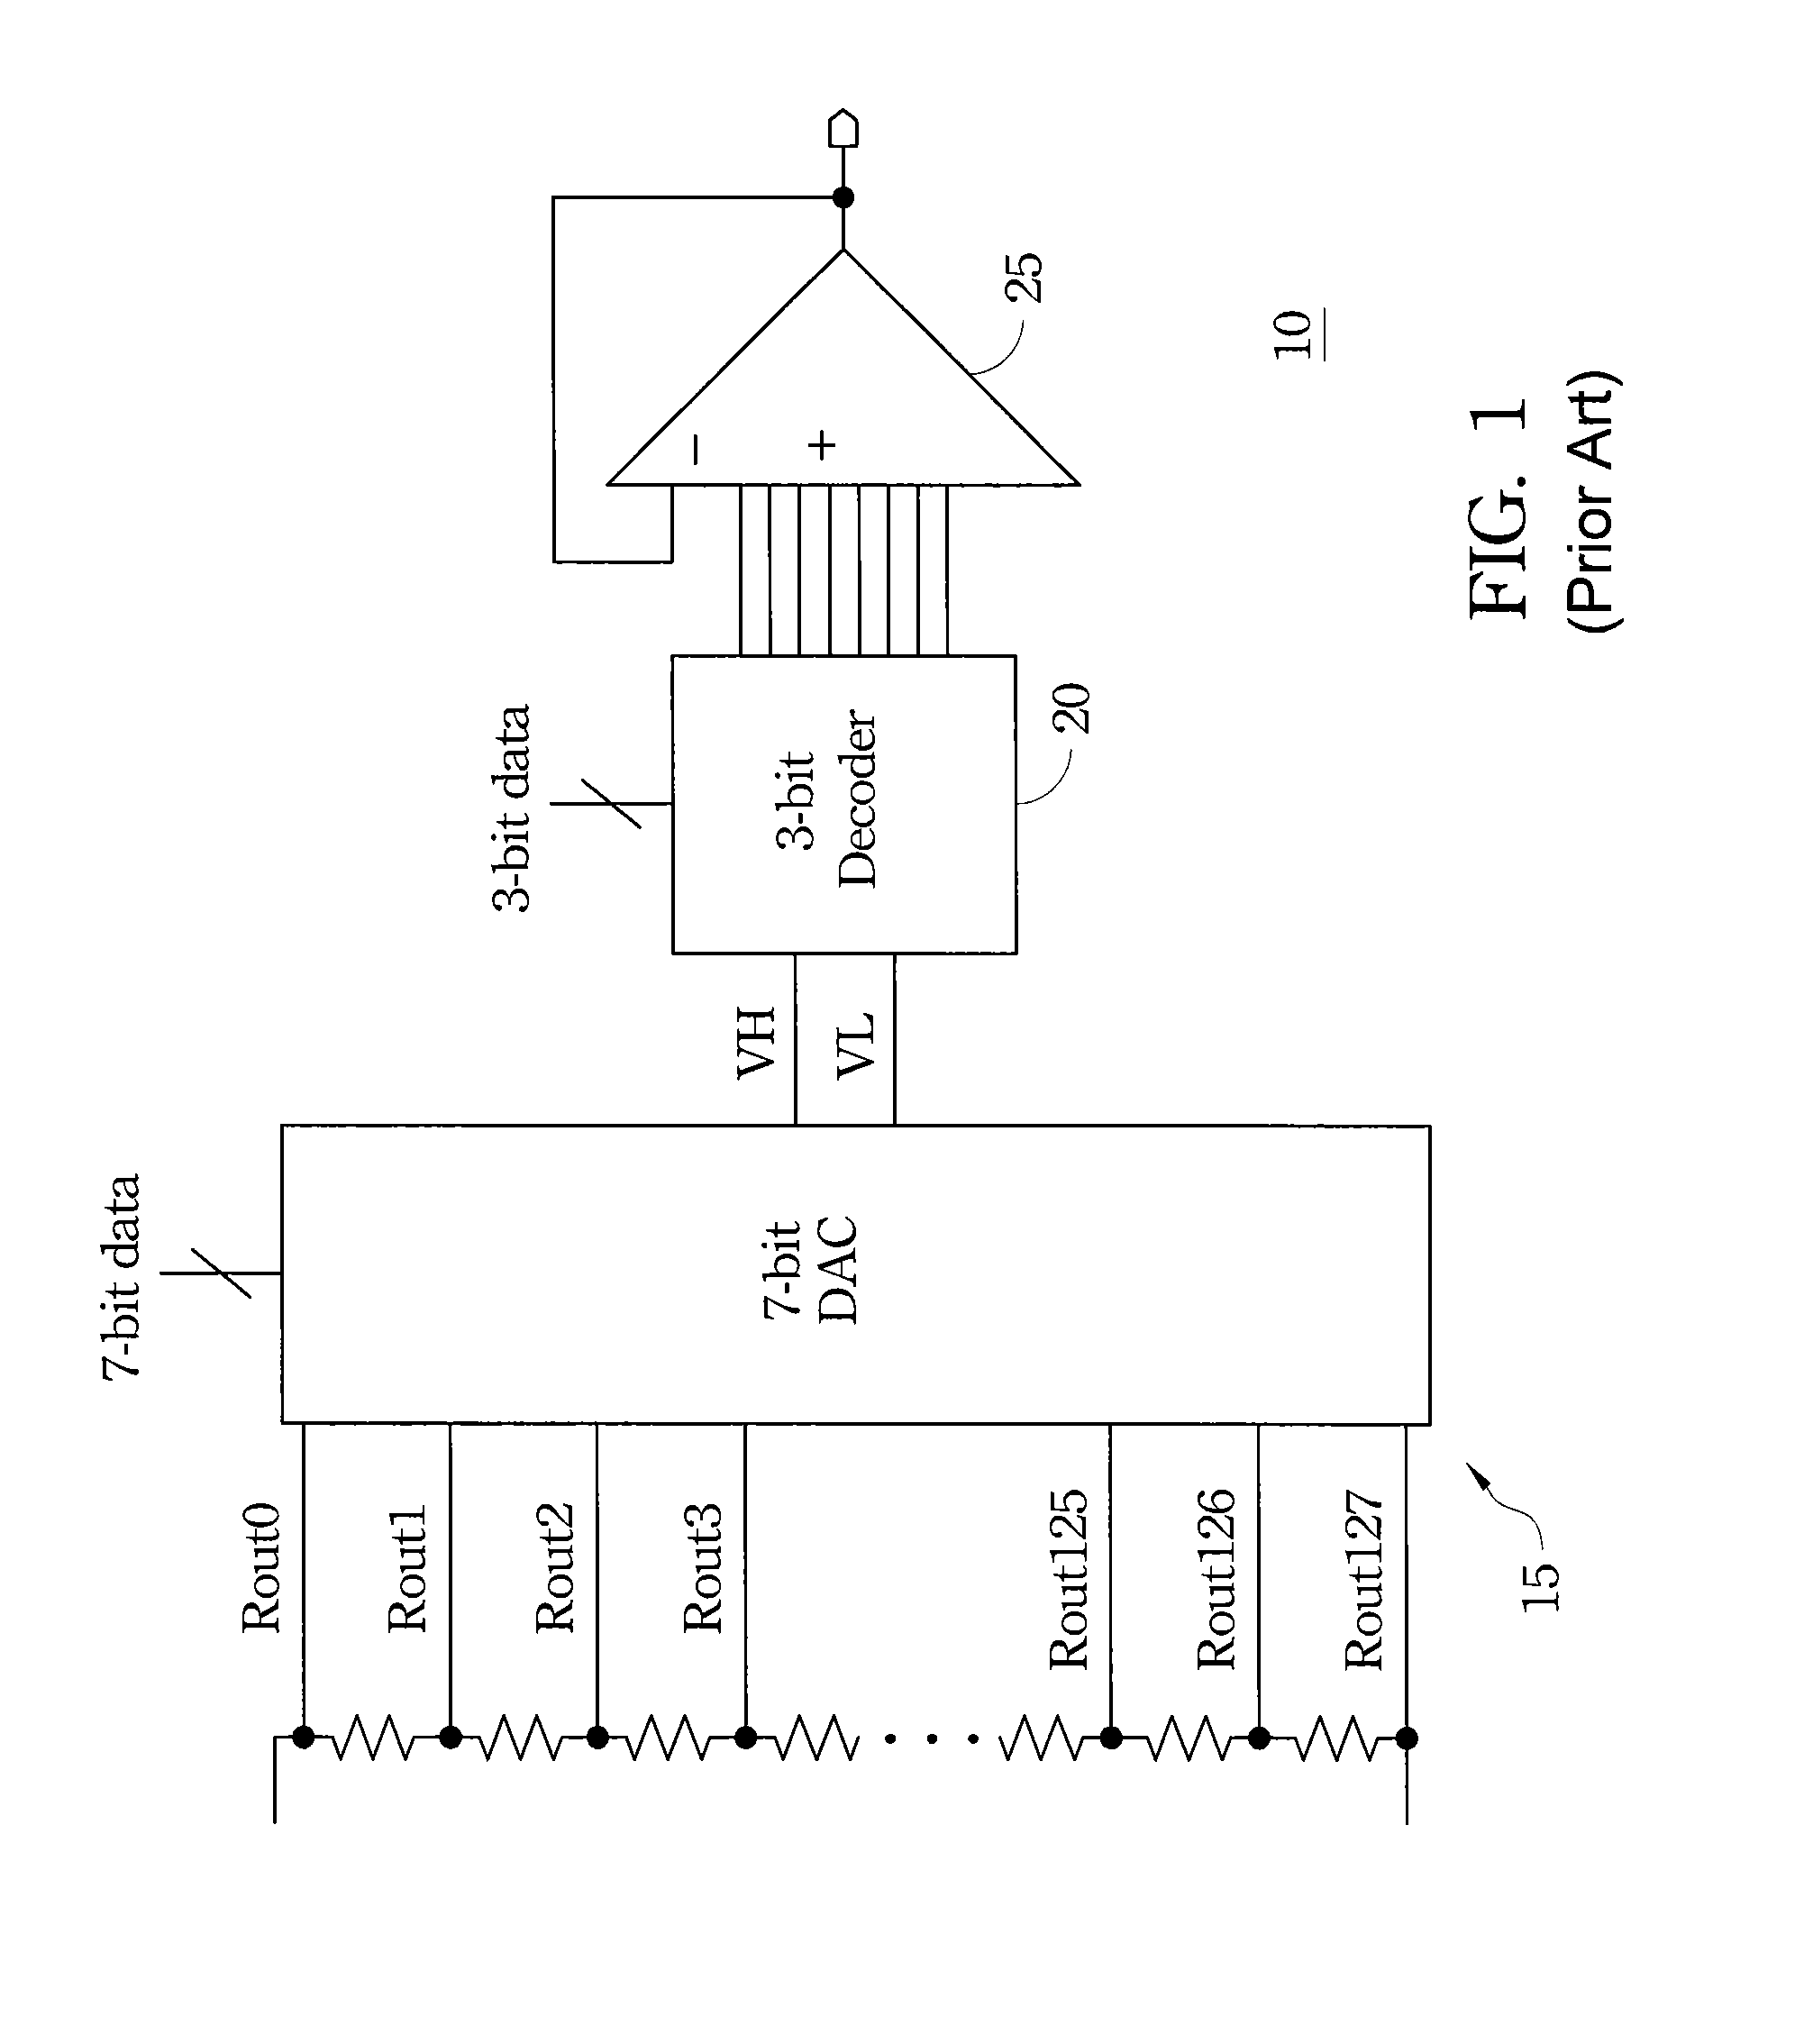 Buffer operational amplifier with self-offset compensator and embedded segmented DAC for improved linearity LCD driver